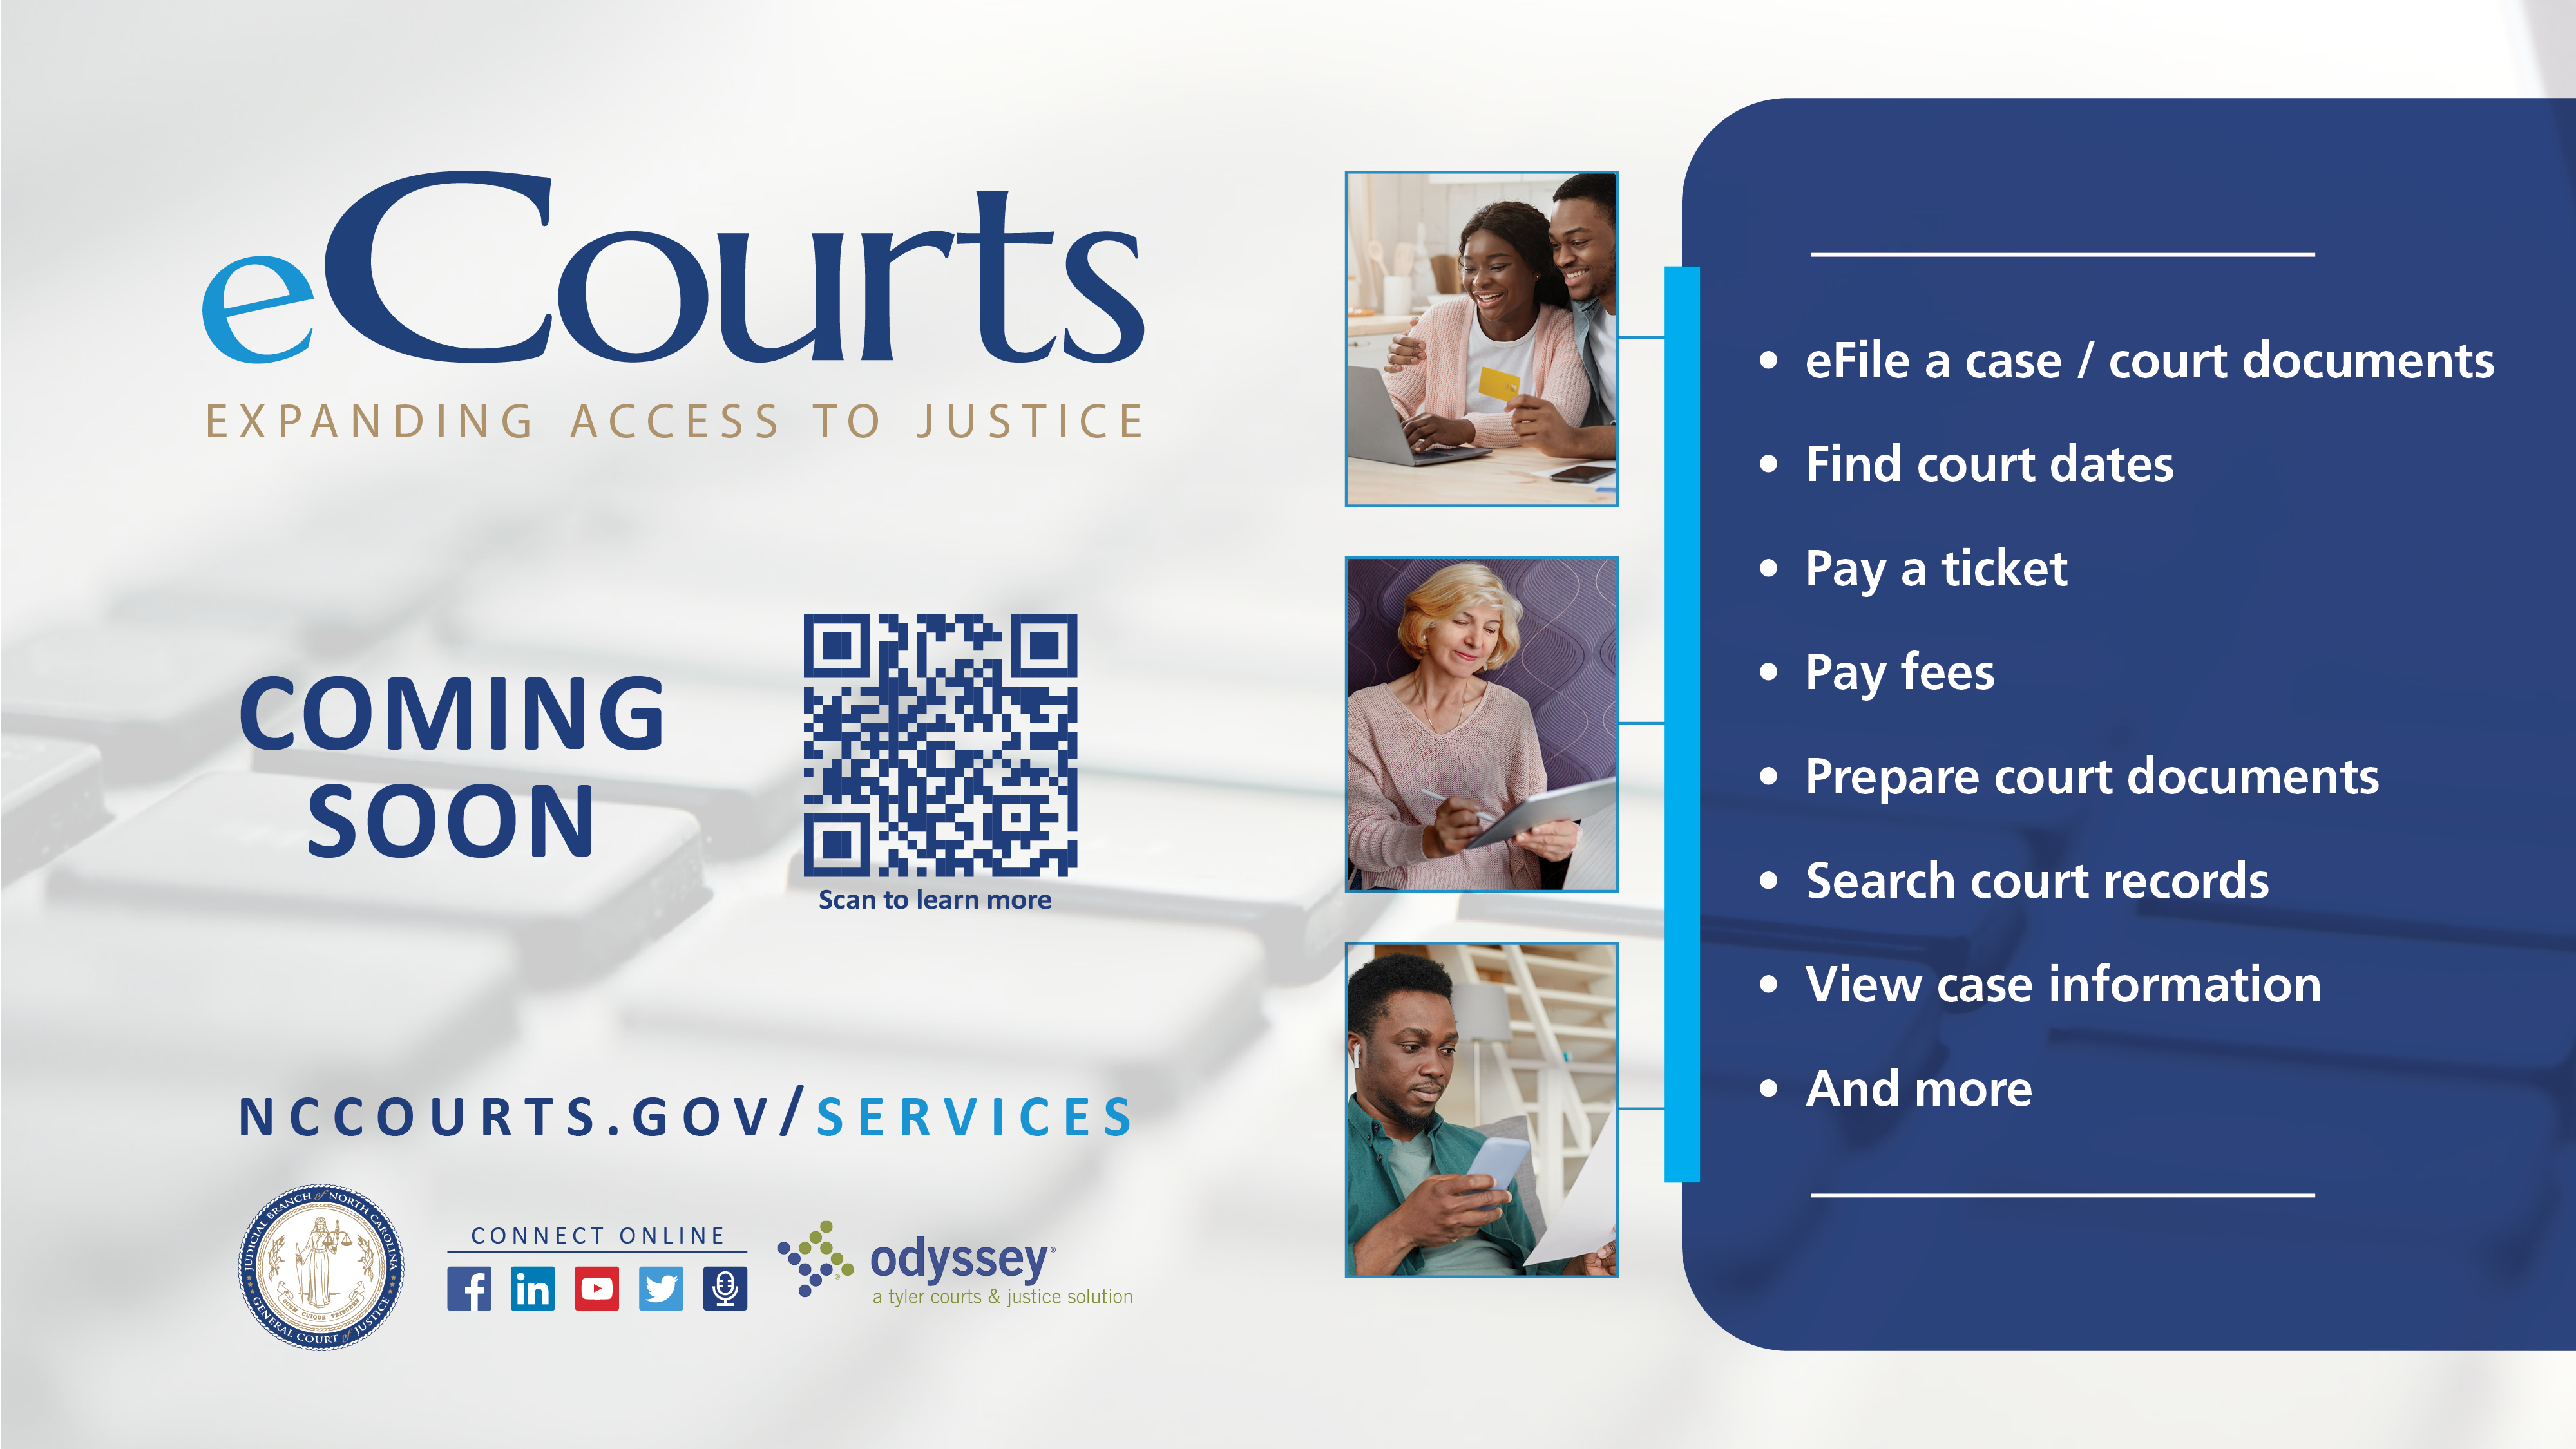 eCourts Services coming soon to this county